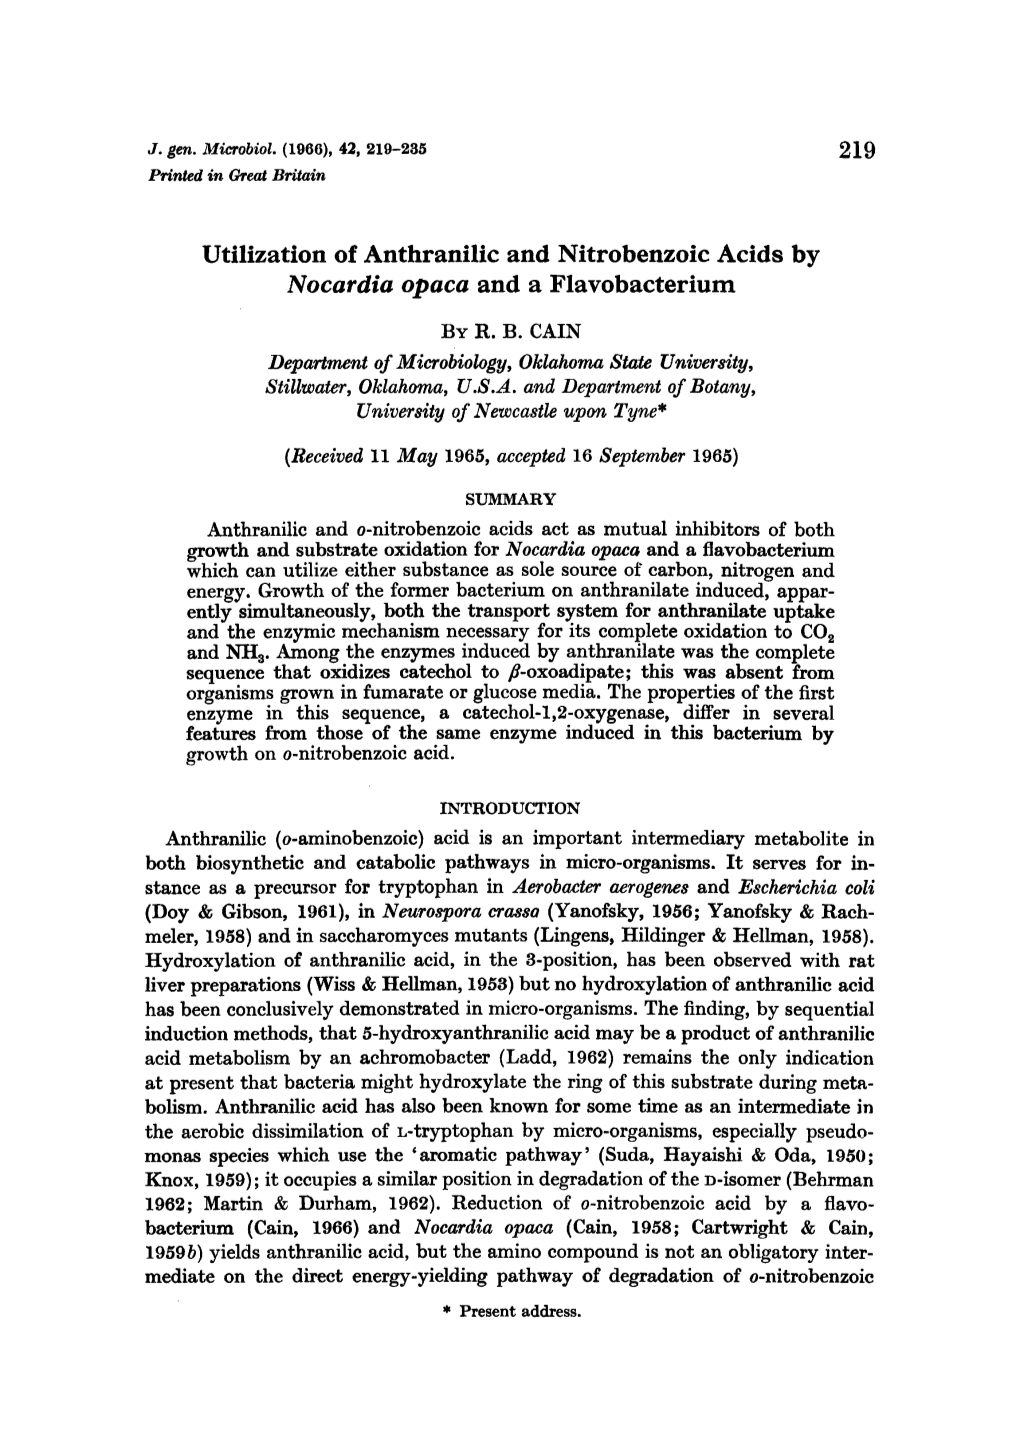 Utilization of Anthranilic and Nitrobenzoic Acids by Nocardia Opaca and a Flavobacteriurn